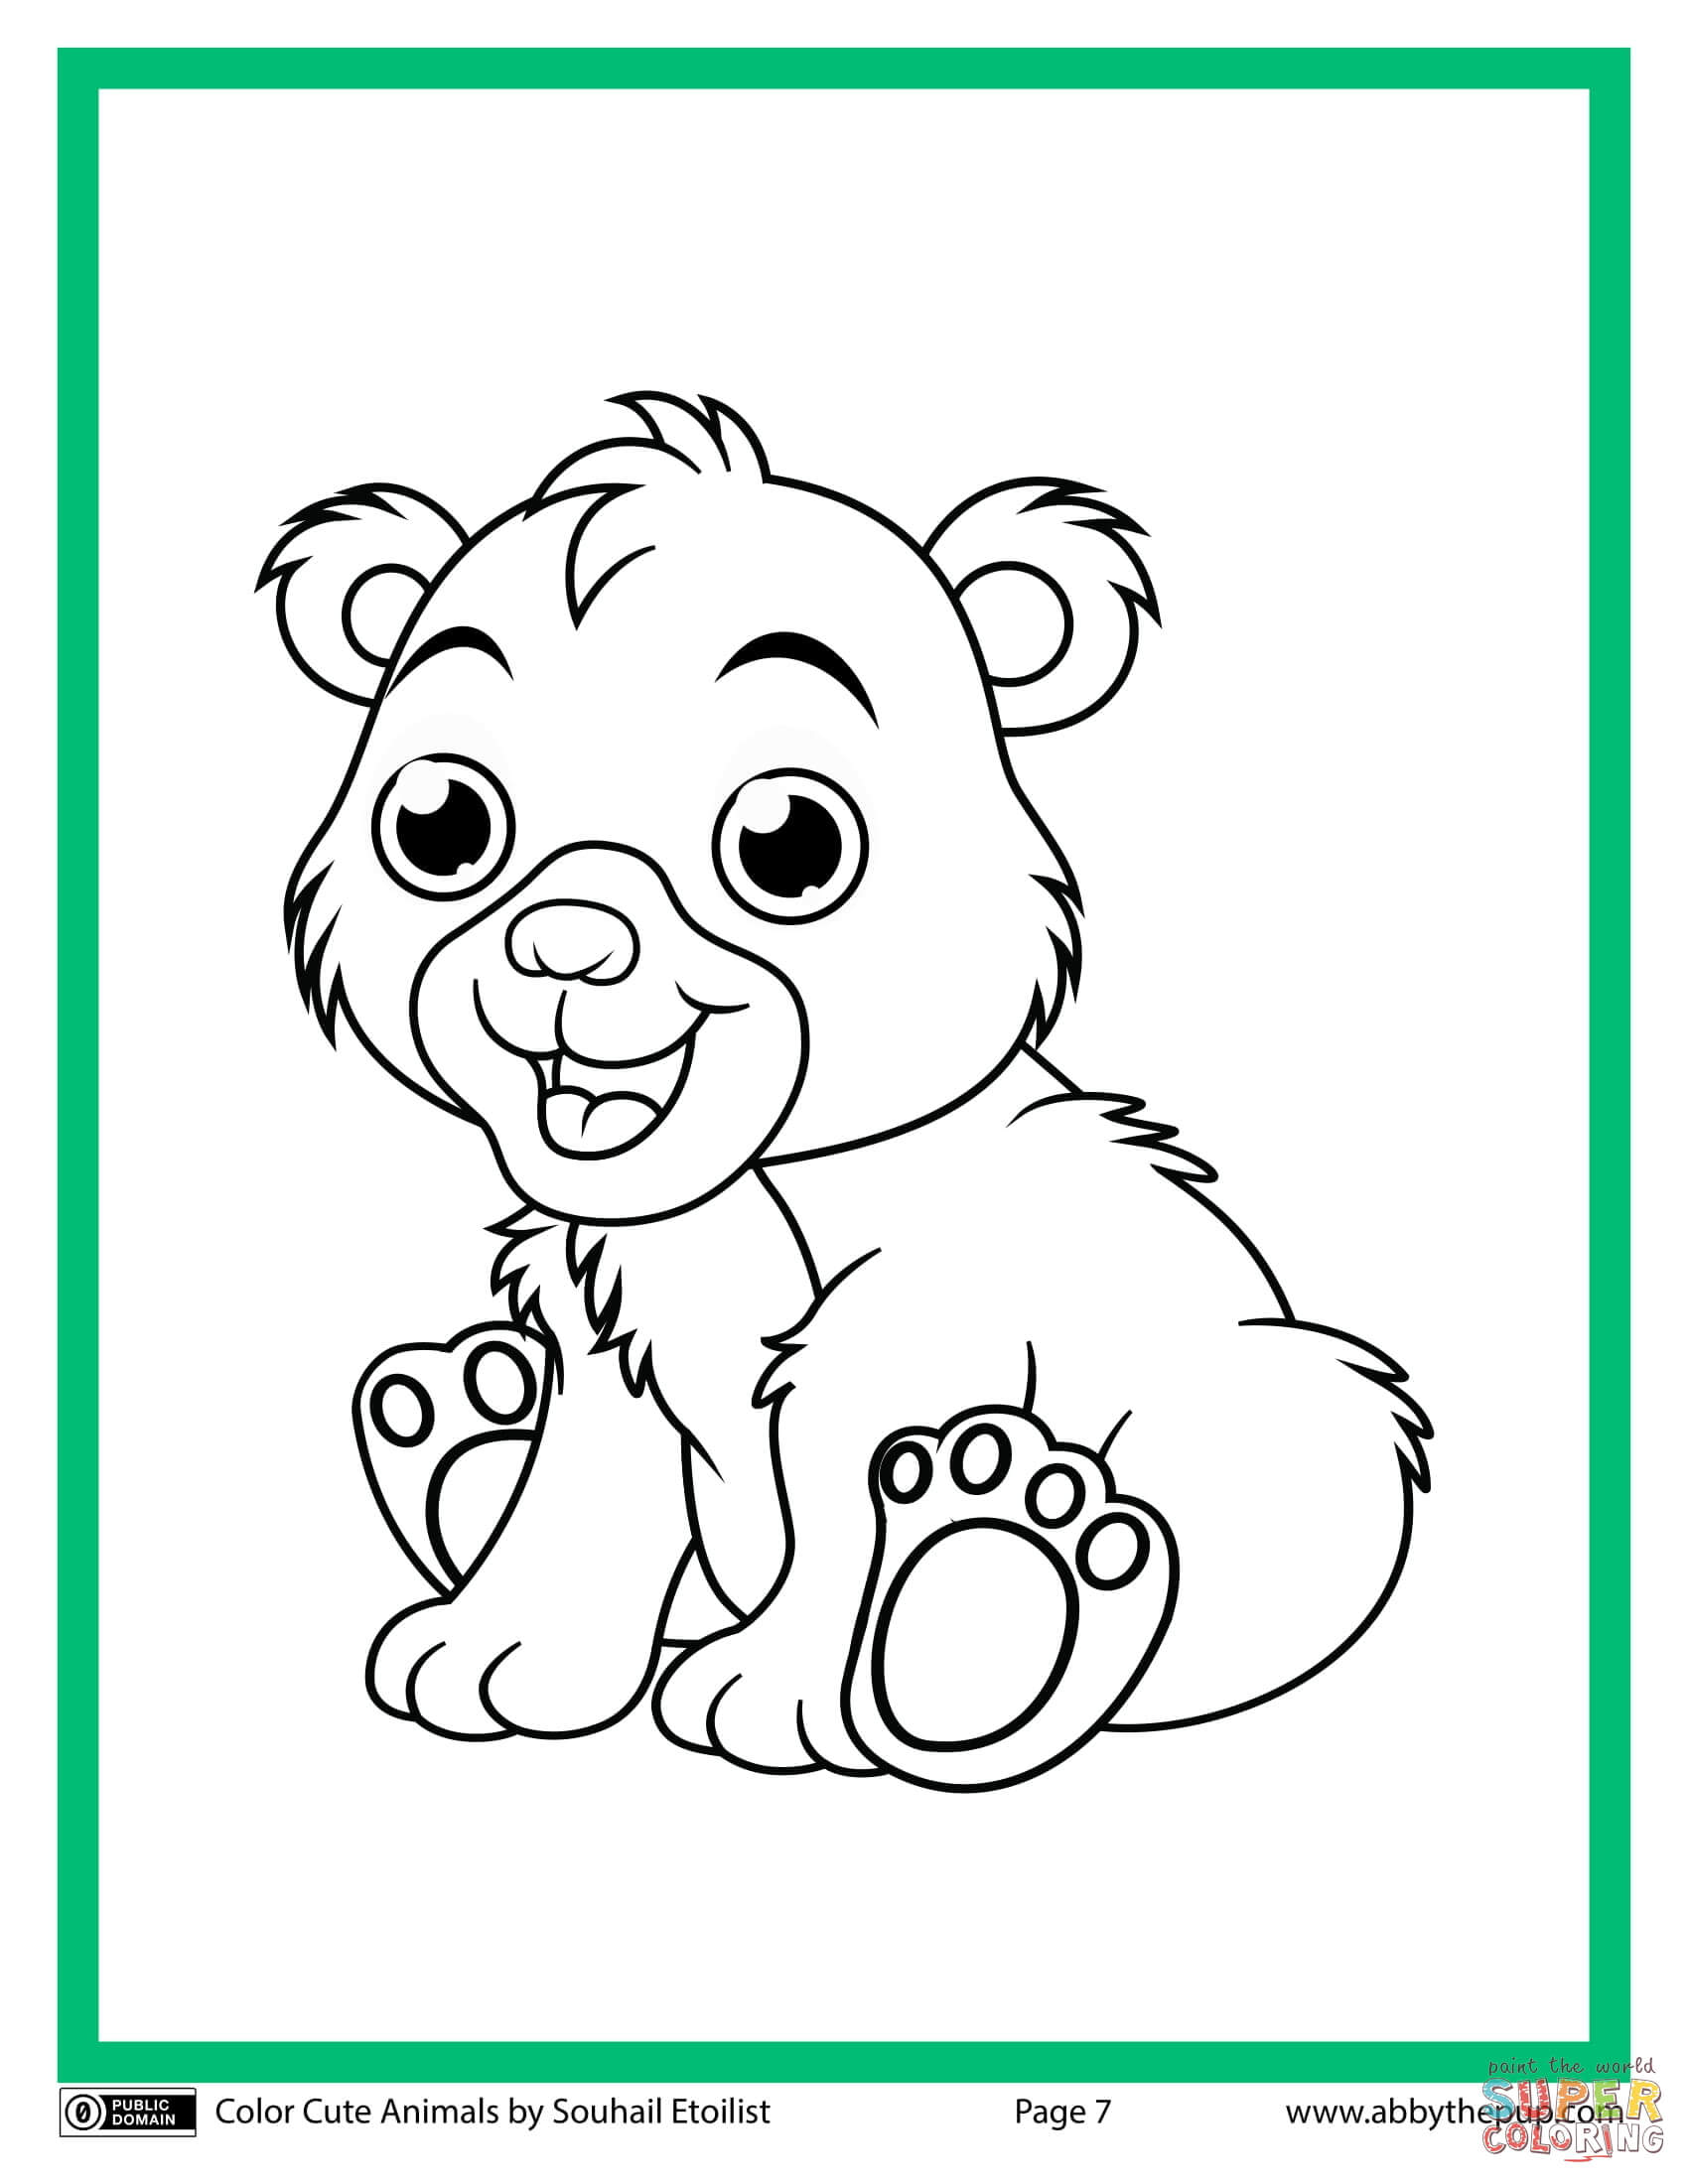 Cute bear coloring page free printable coloring pages